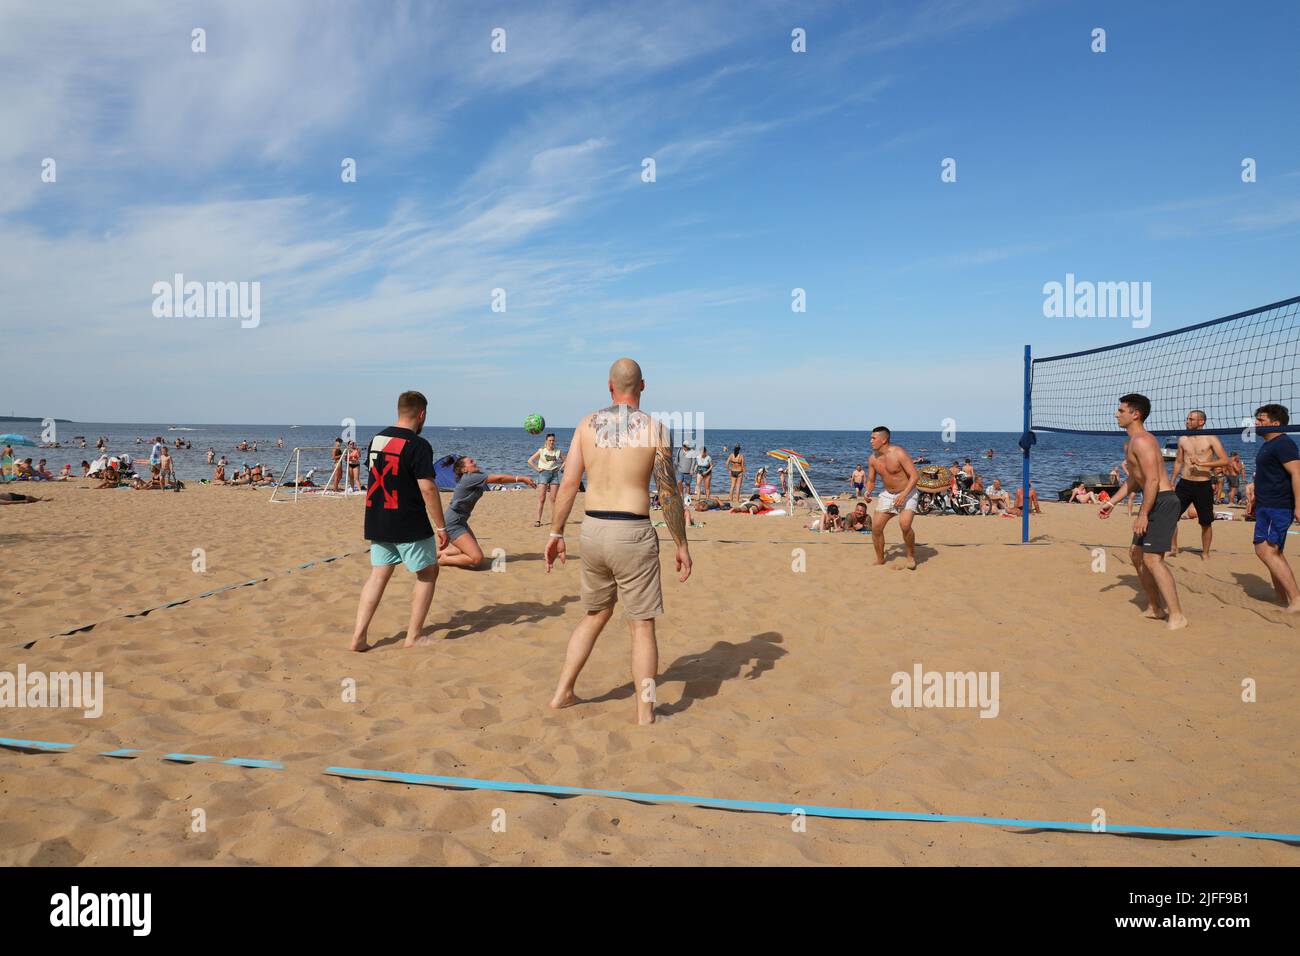 Photograph of people playing beach volleyball in summer Stock Photo